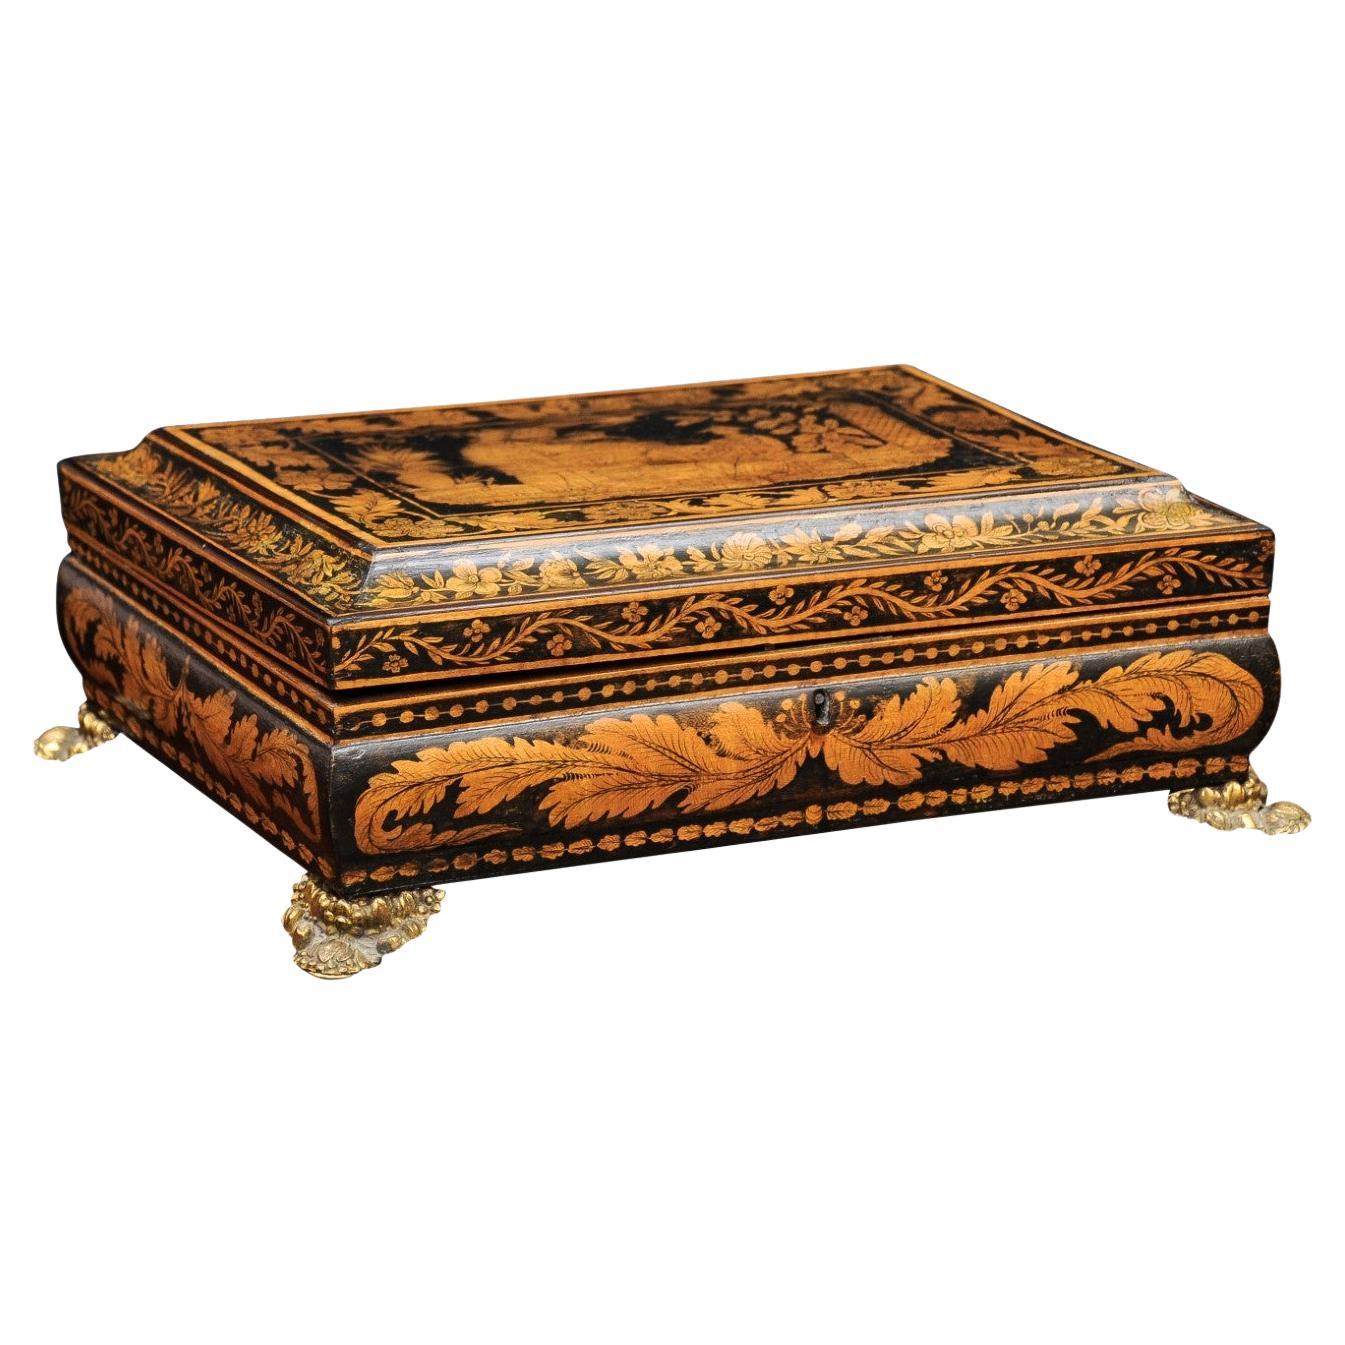 English Early 19th Century Penwork Box with Chinoiserie Decoration